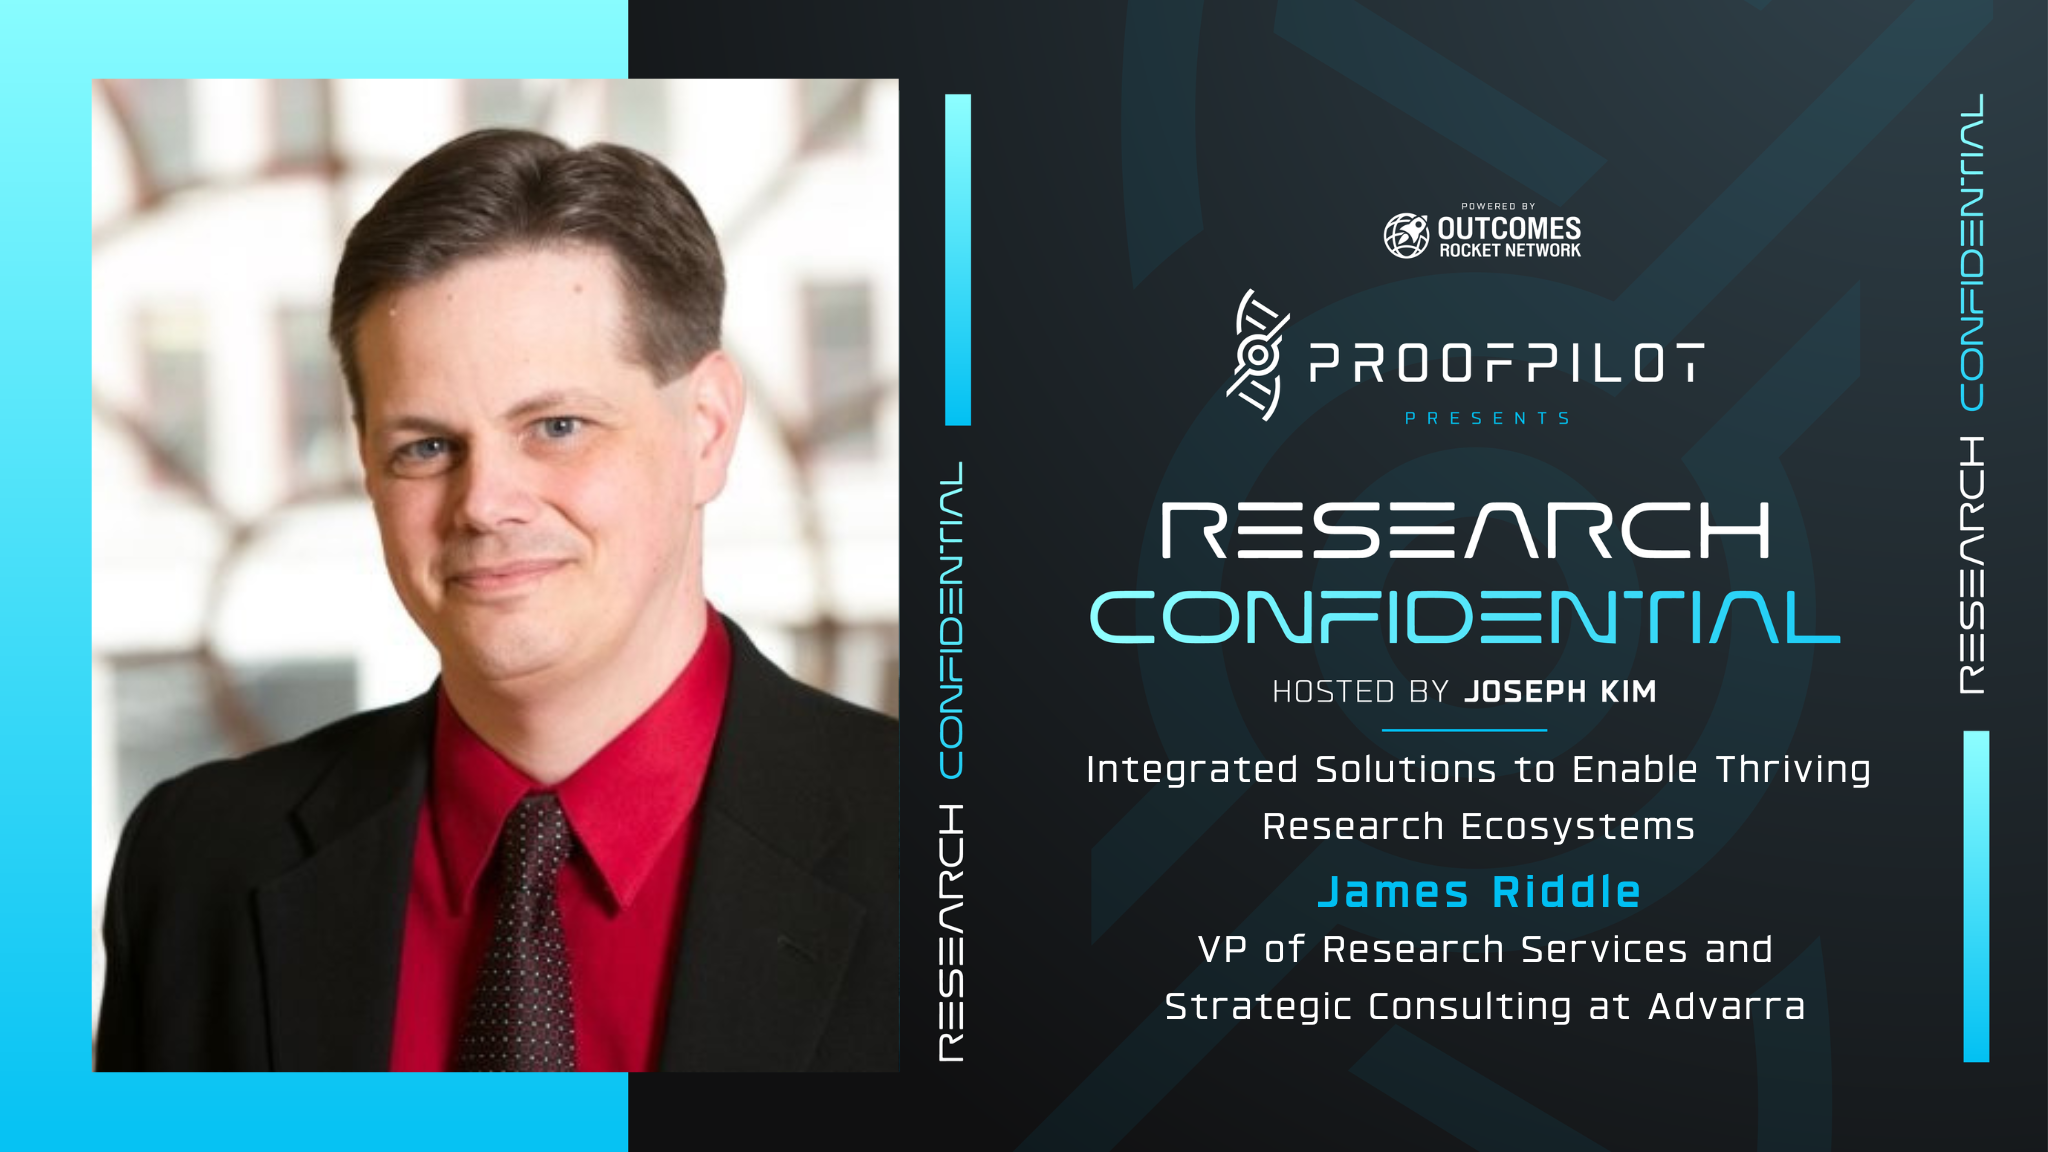 Research Confidential - James Riddle